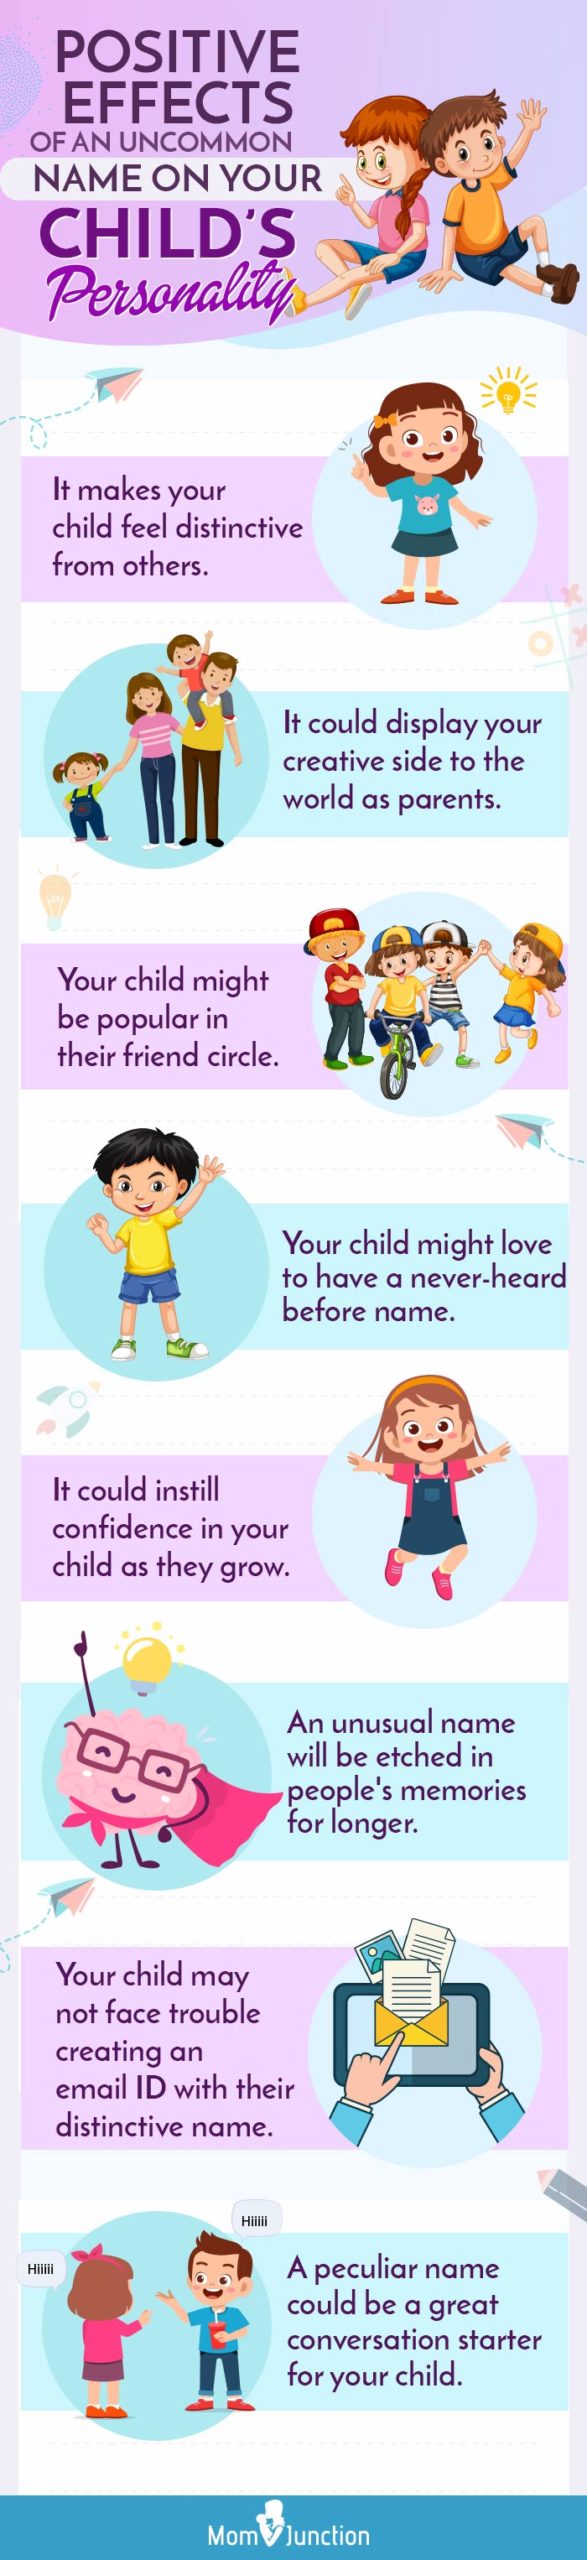 positive effects of an uncommon name on your child’s personality (infographic)